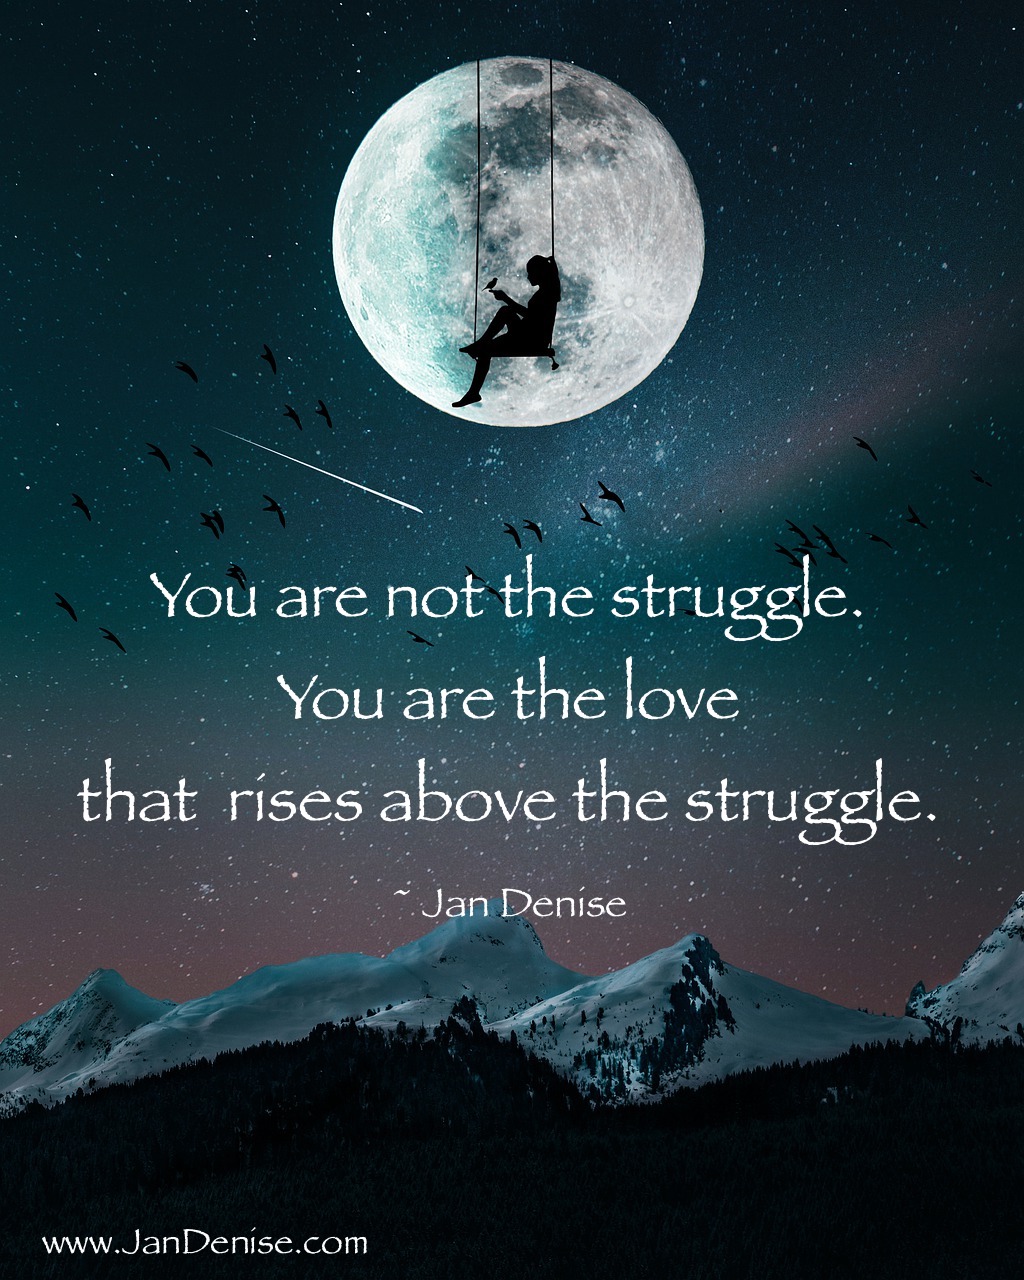 You are rising …